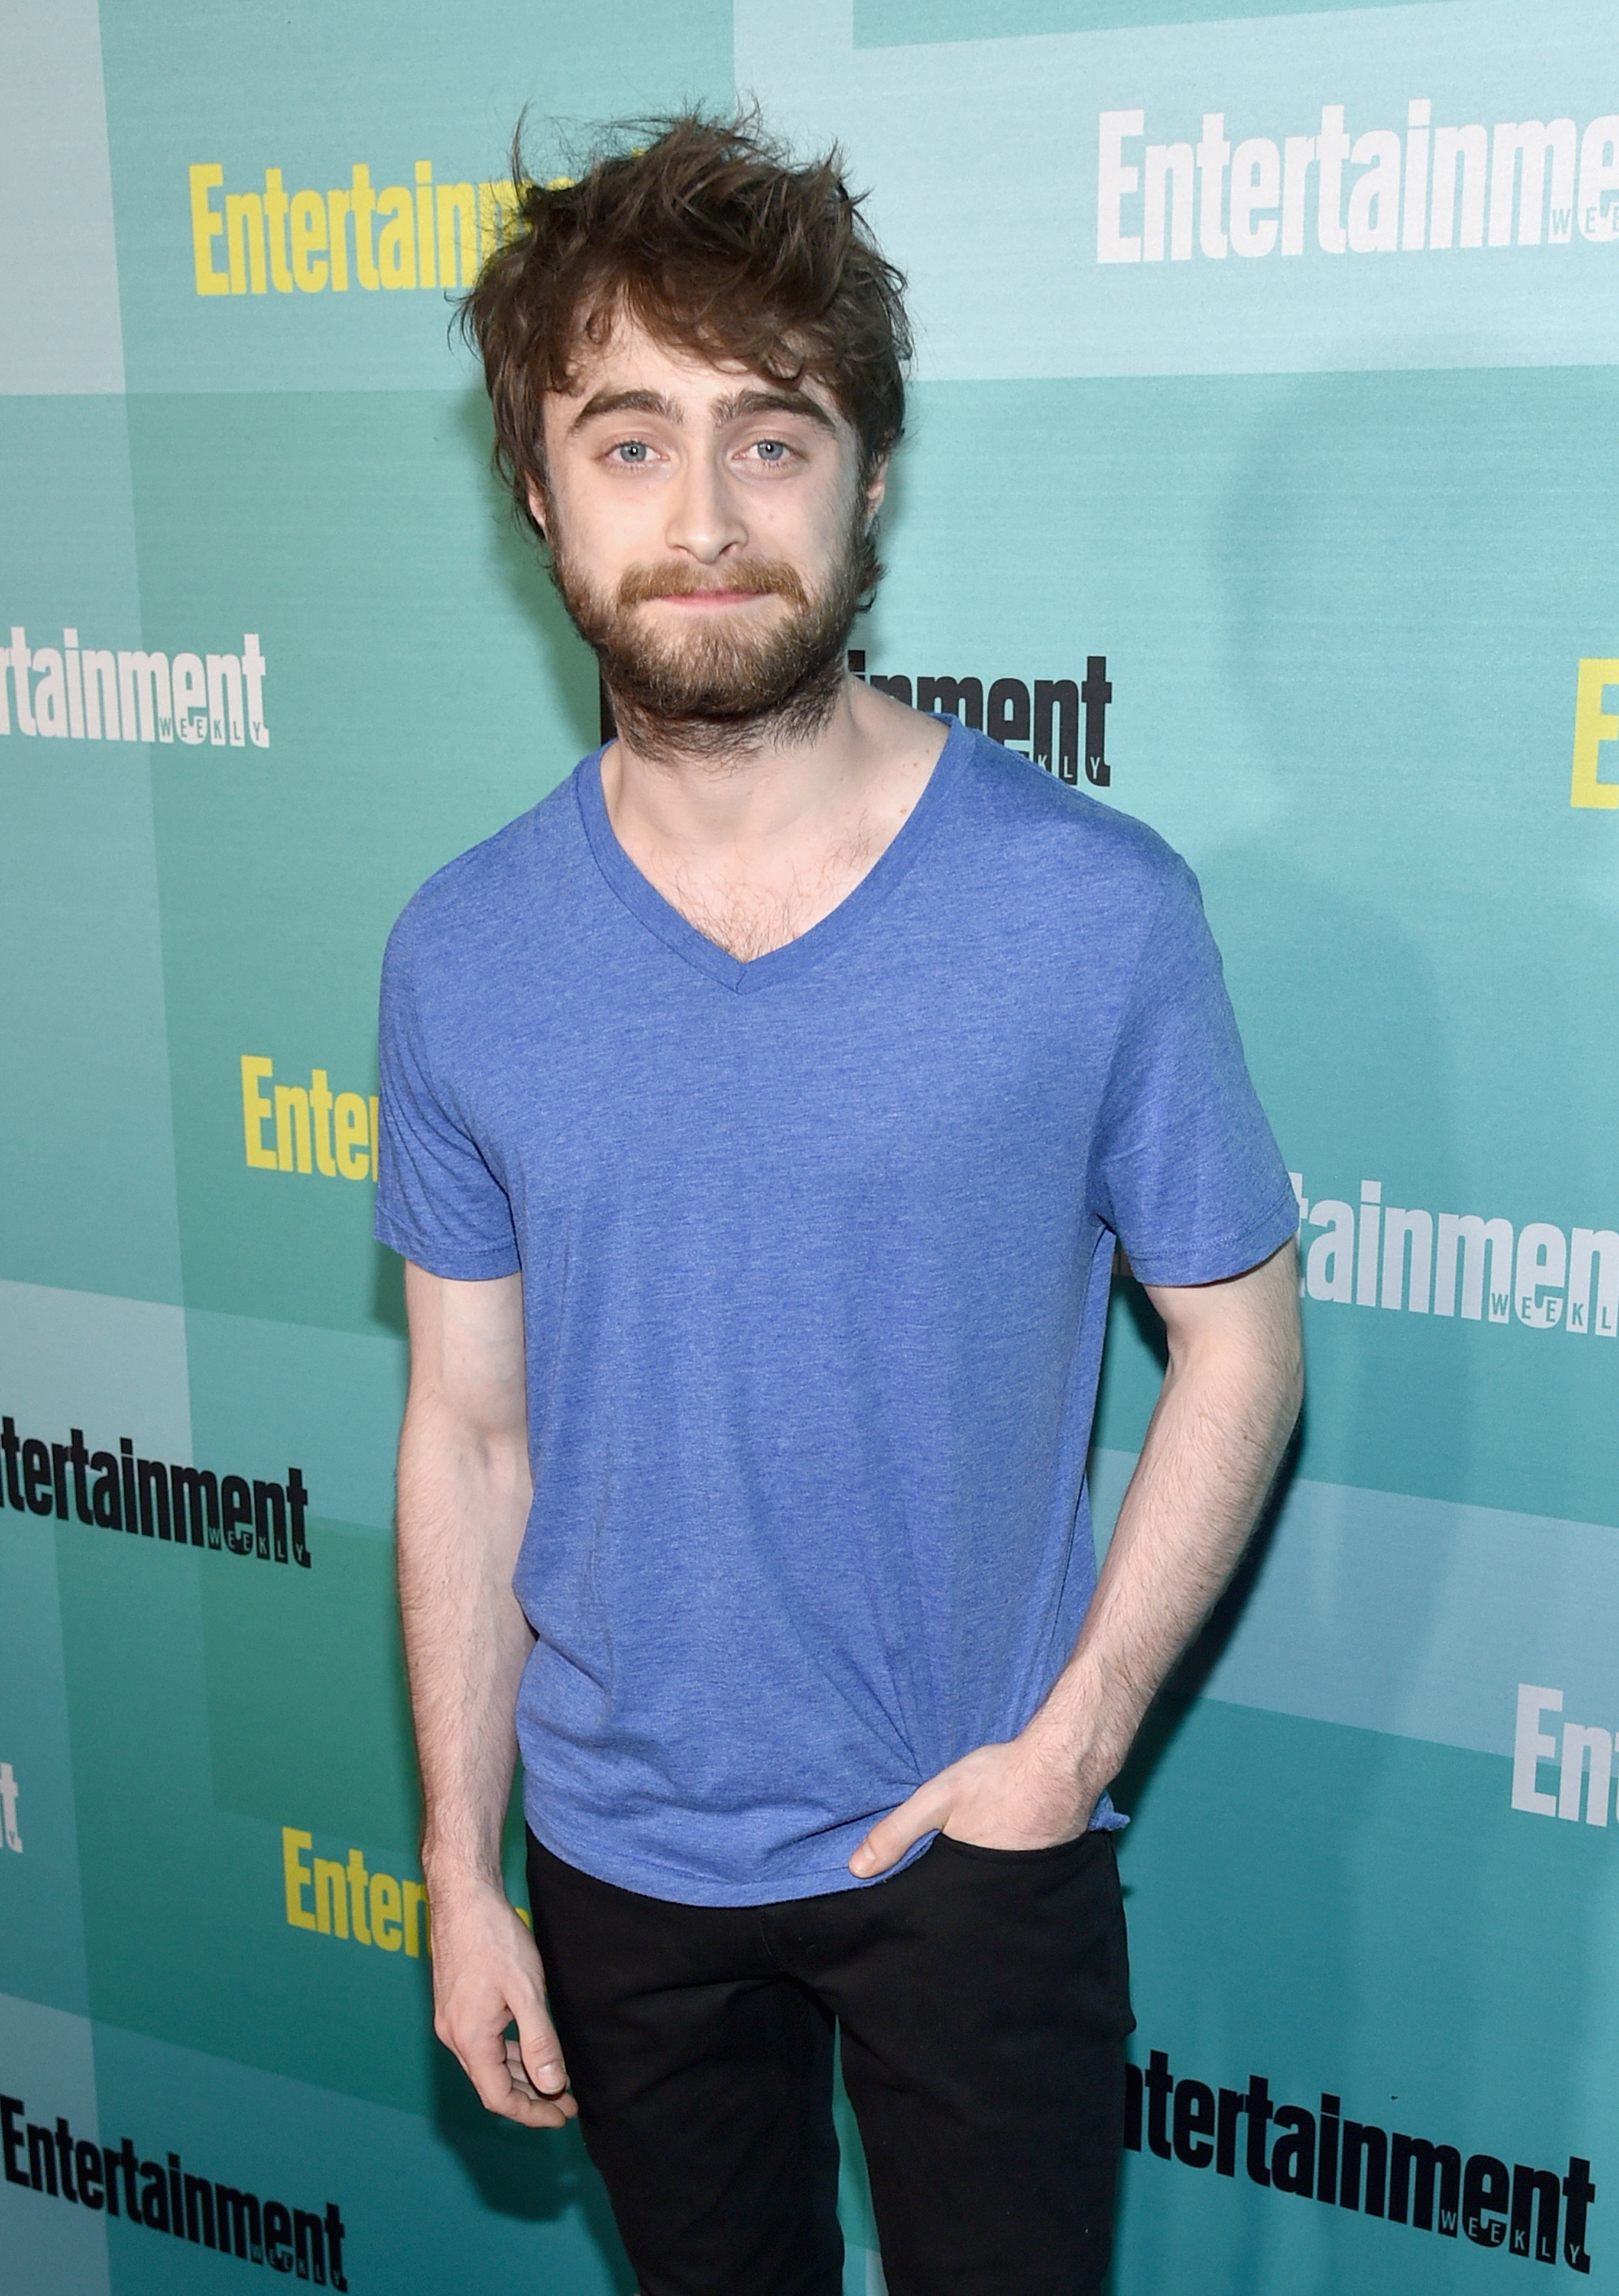 Daniel Radcliffe arrives at the Entertainment Weekly celebration at The Hard Rock Hotel in San Diego on July 11, 2015.